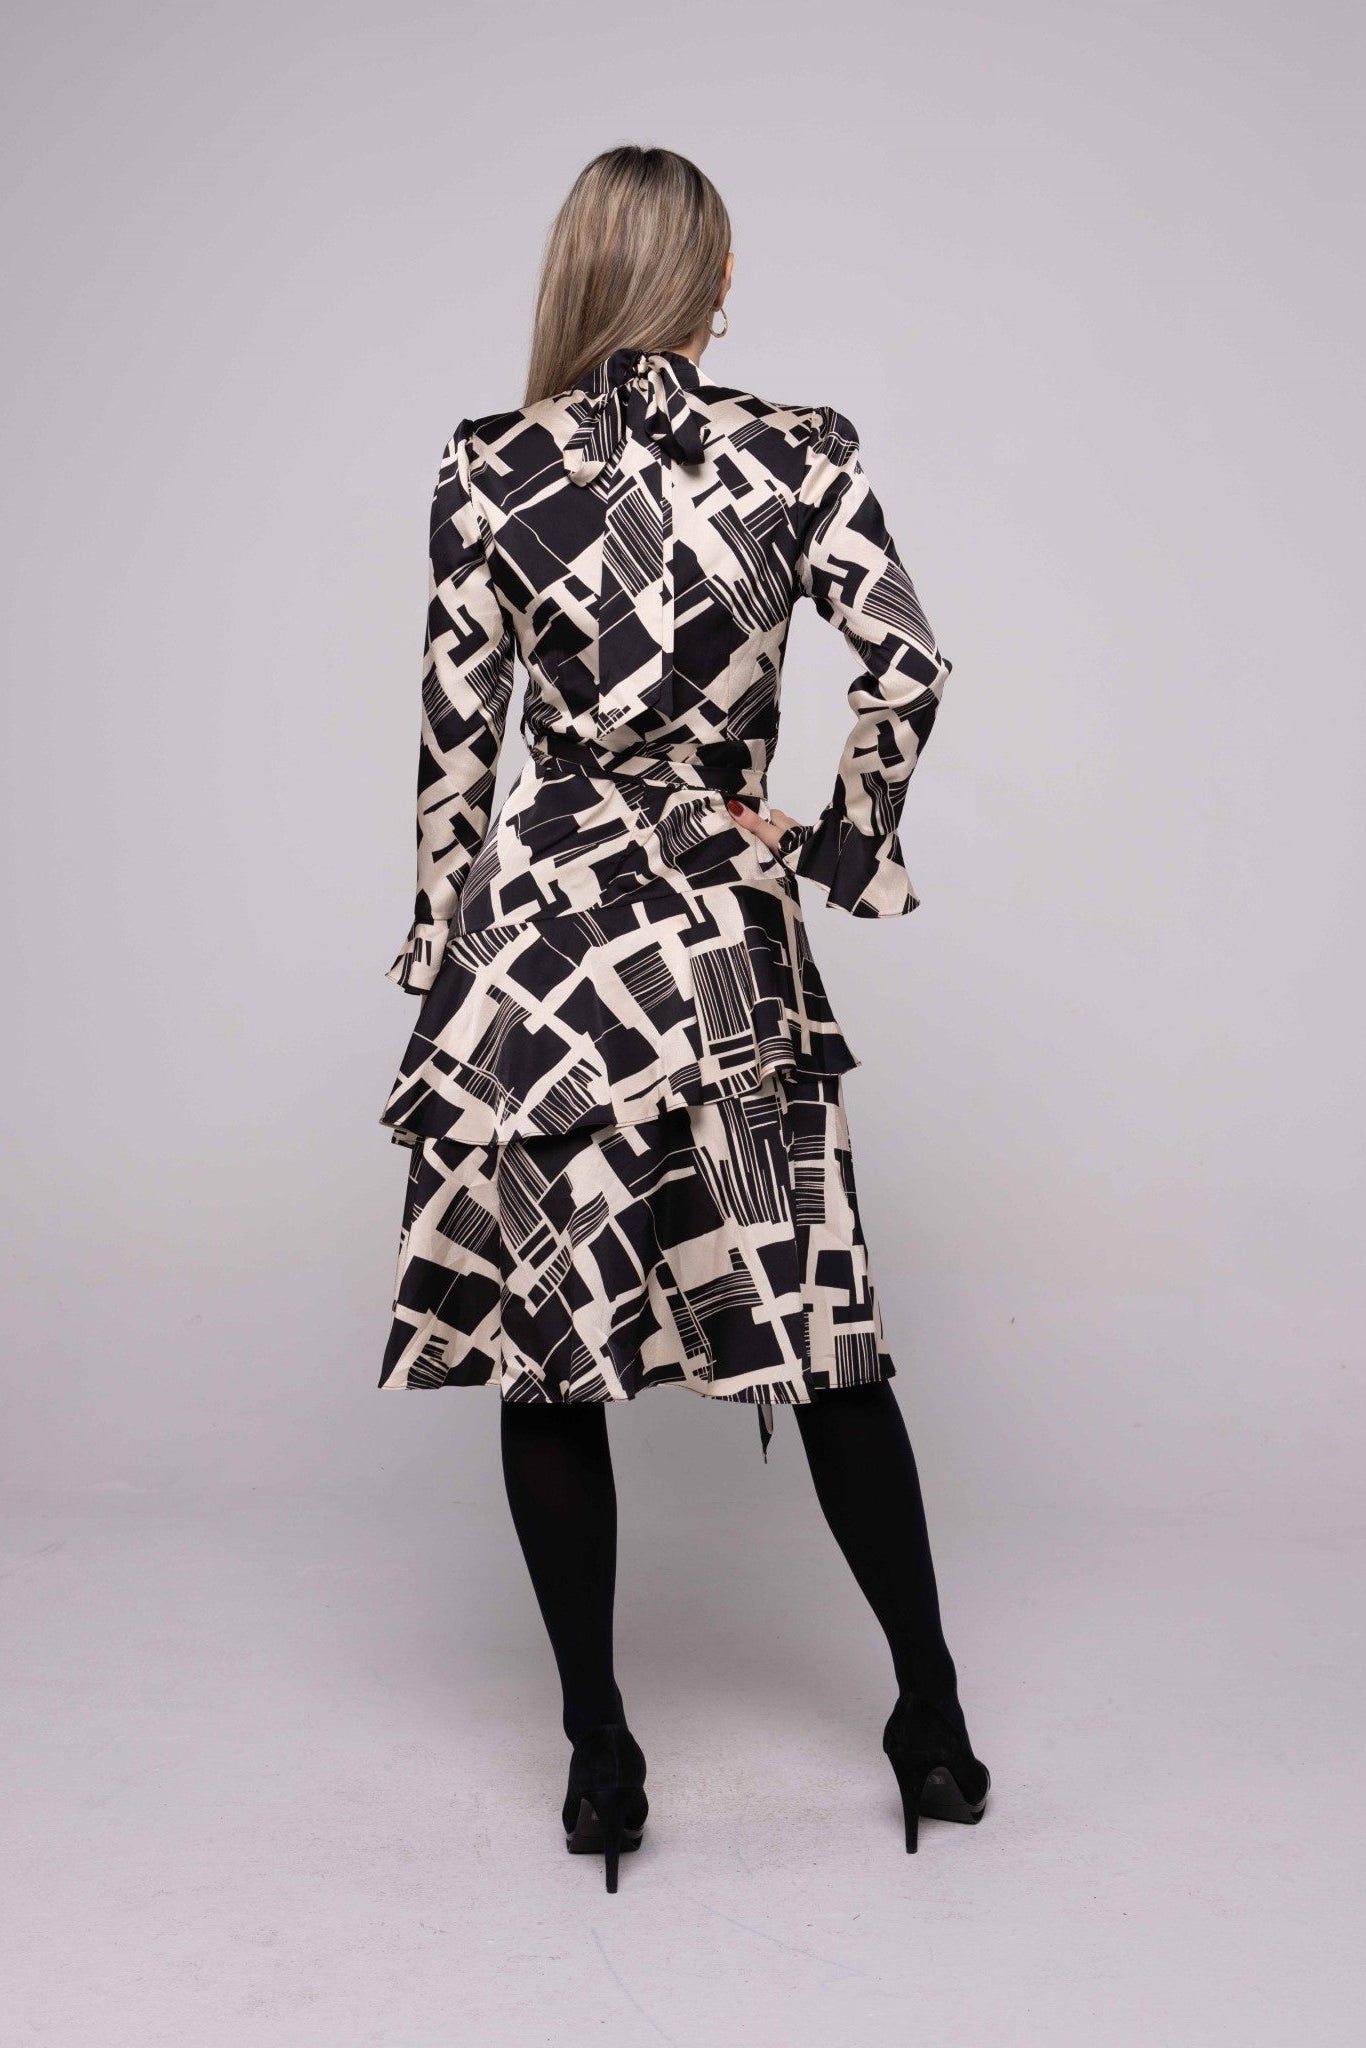 GEOMETRIC PRINT DRESS WITH LAYERED SKIRT AND TIE BACK